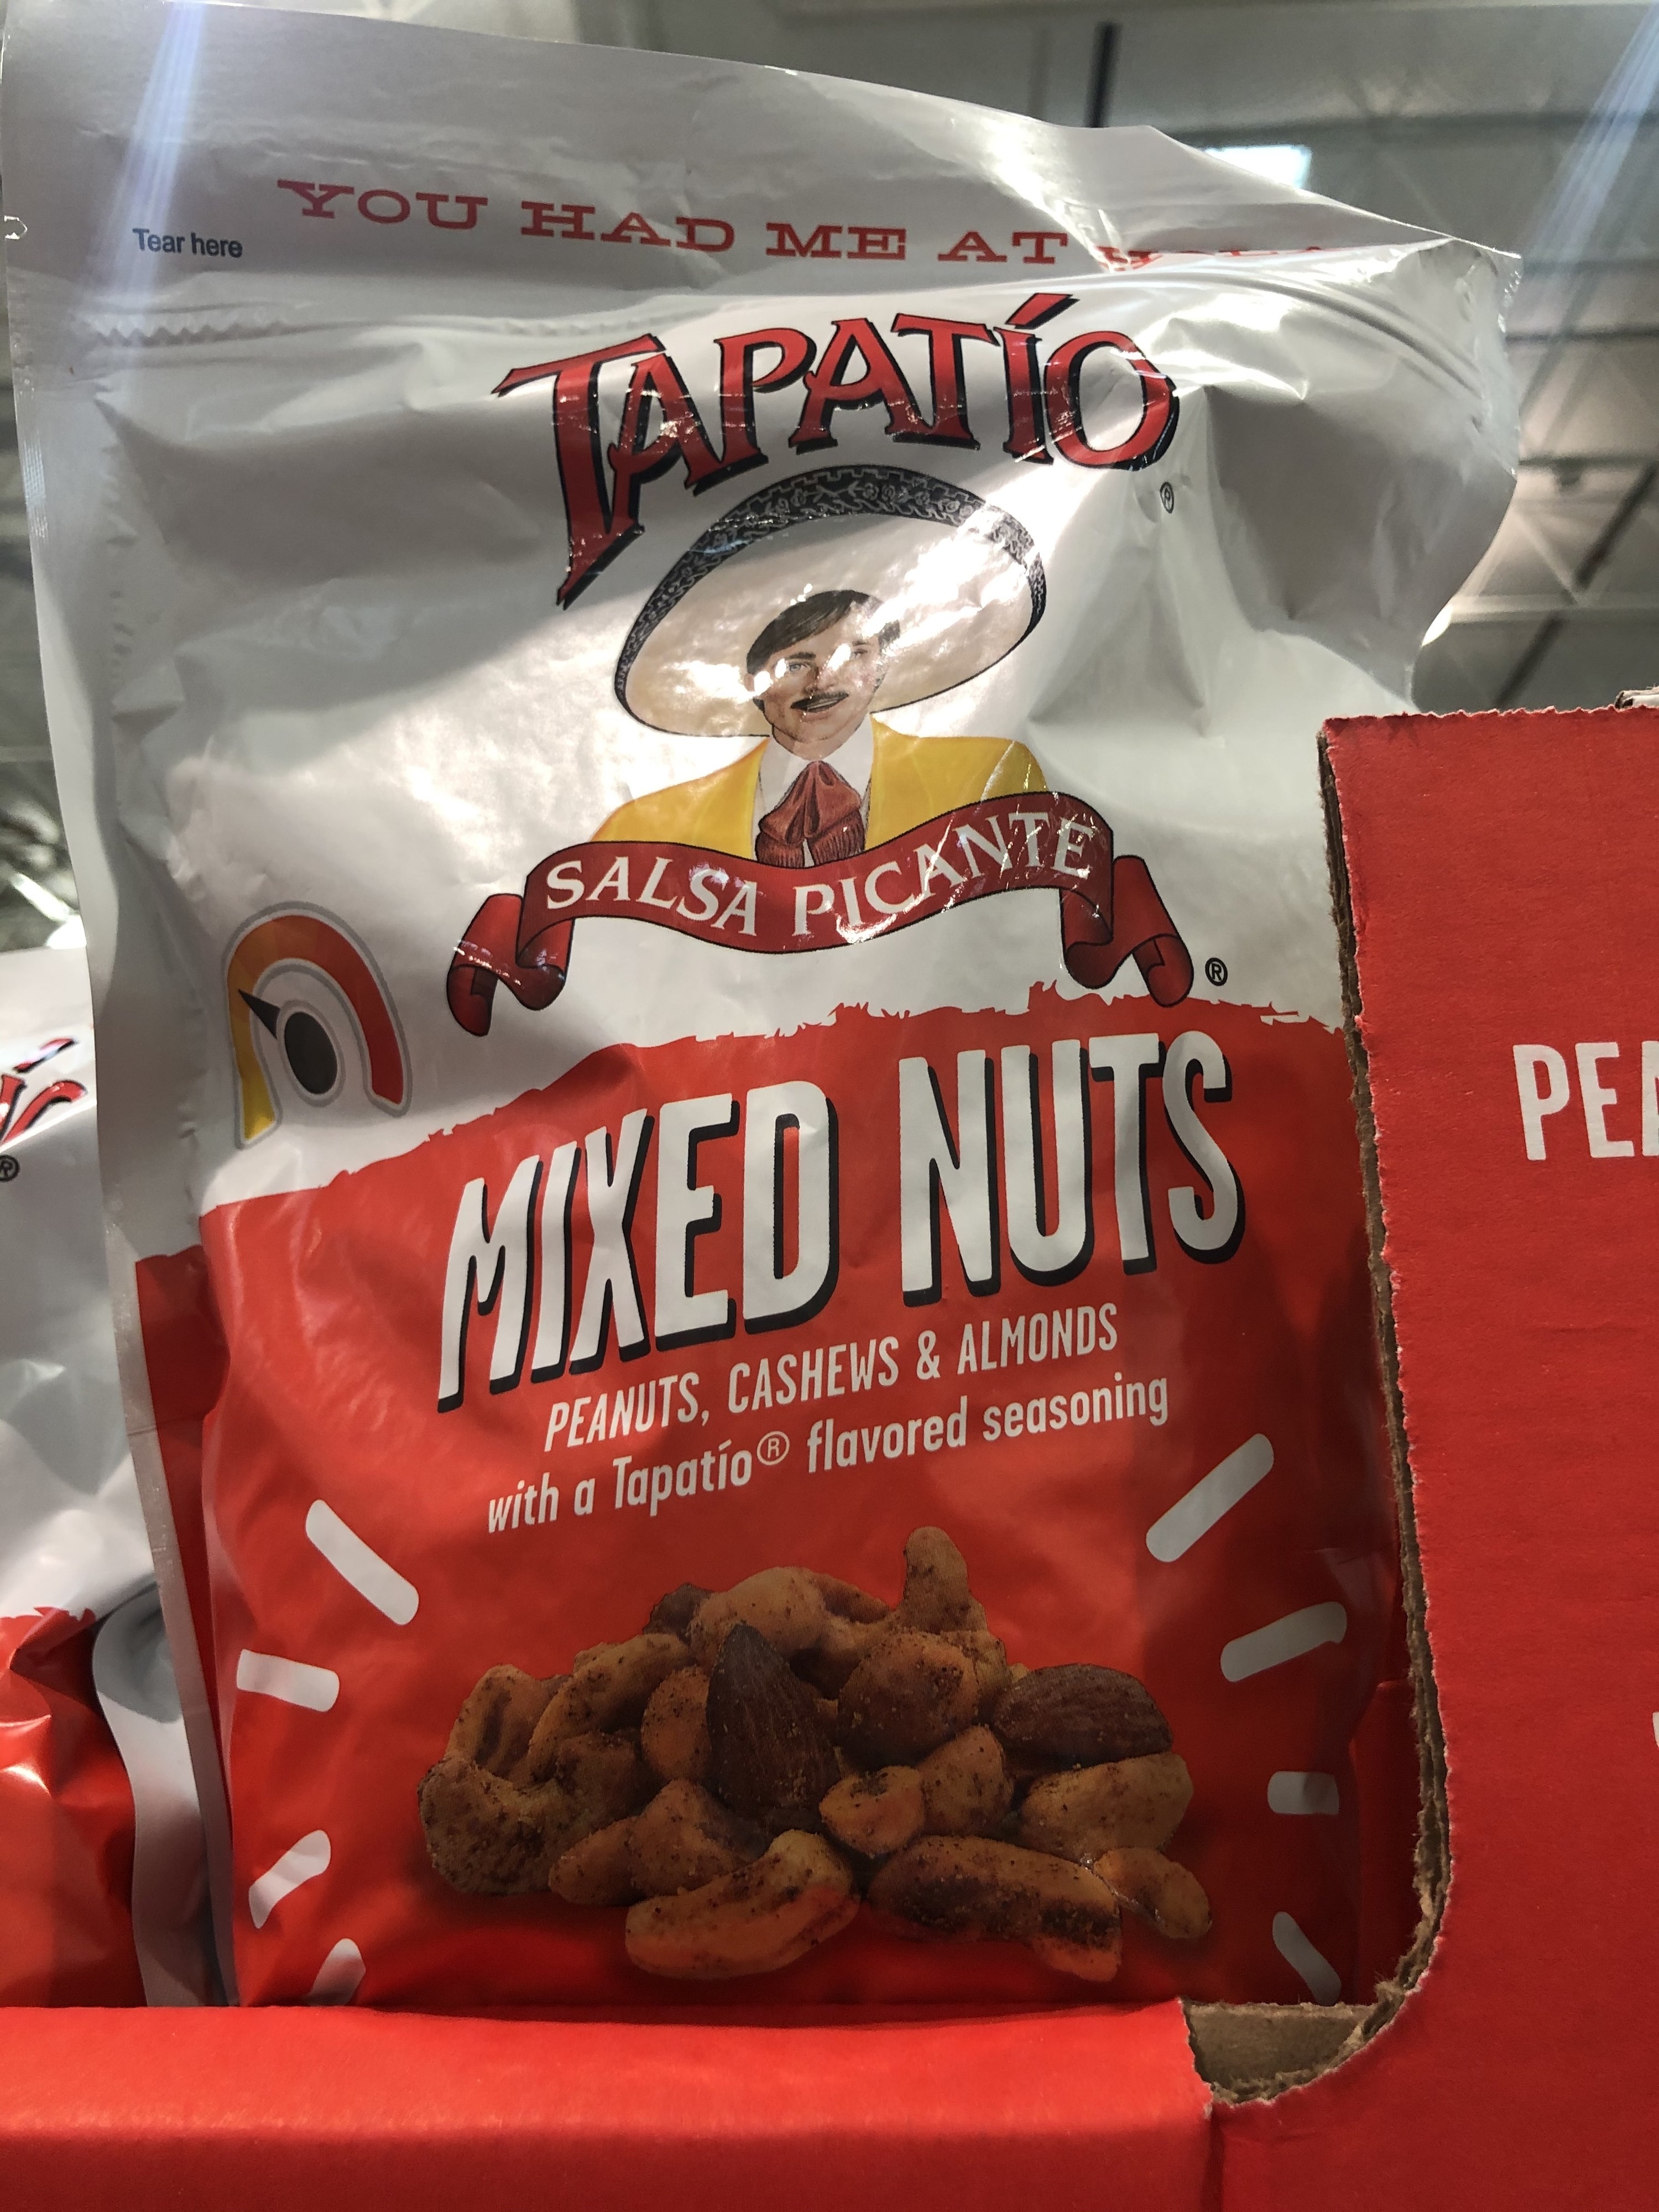 A bag of Tapatio mixed nuts